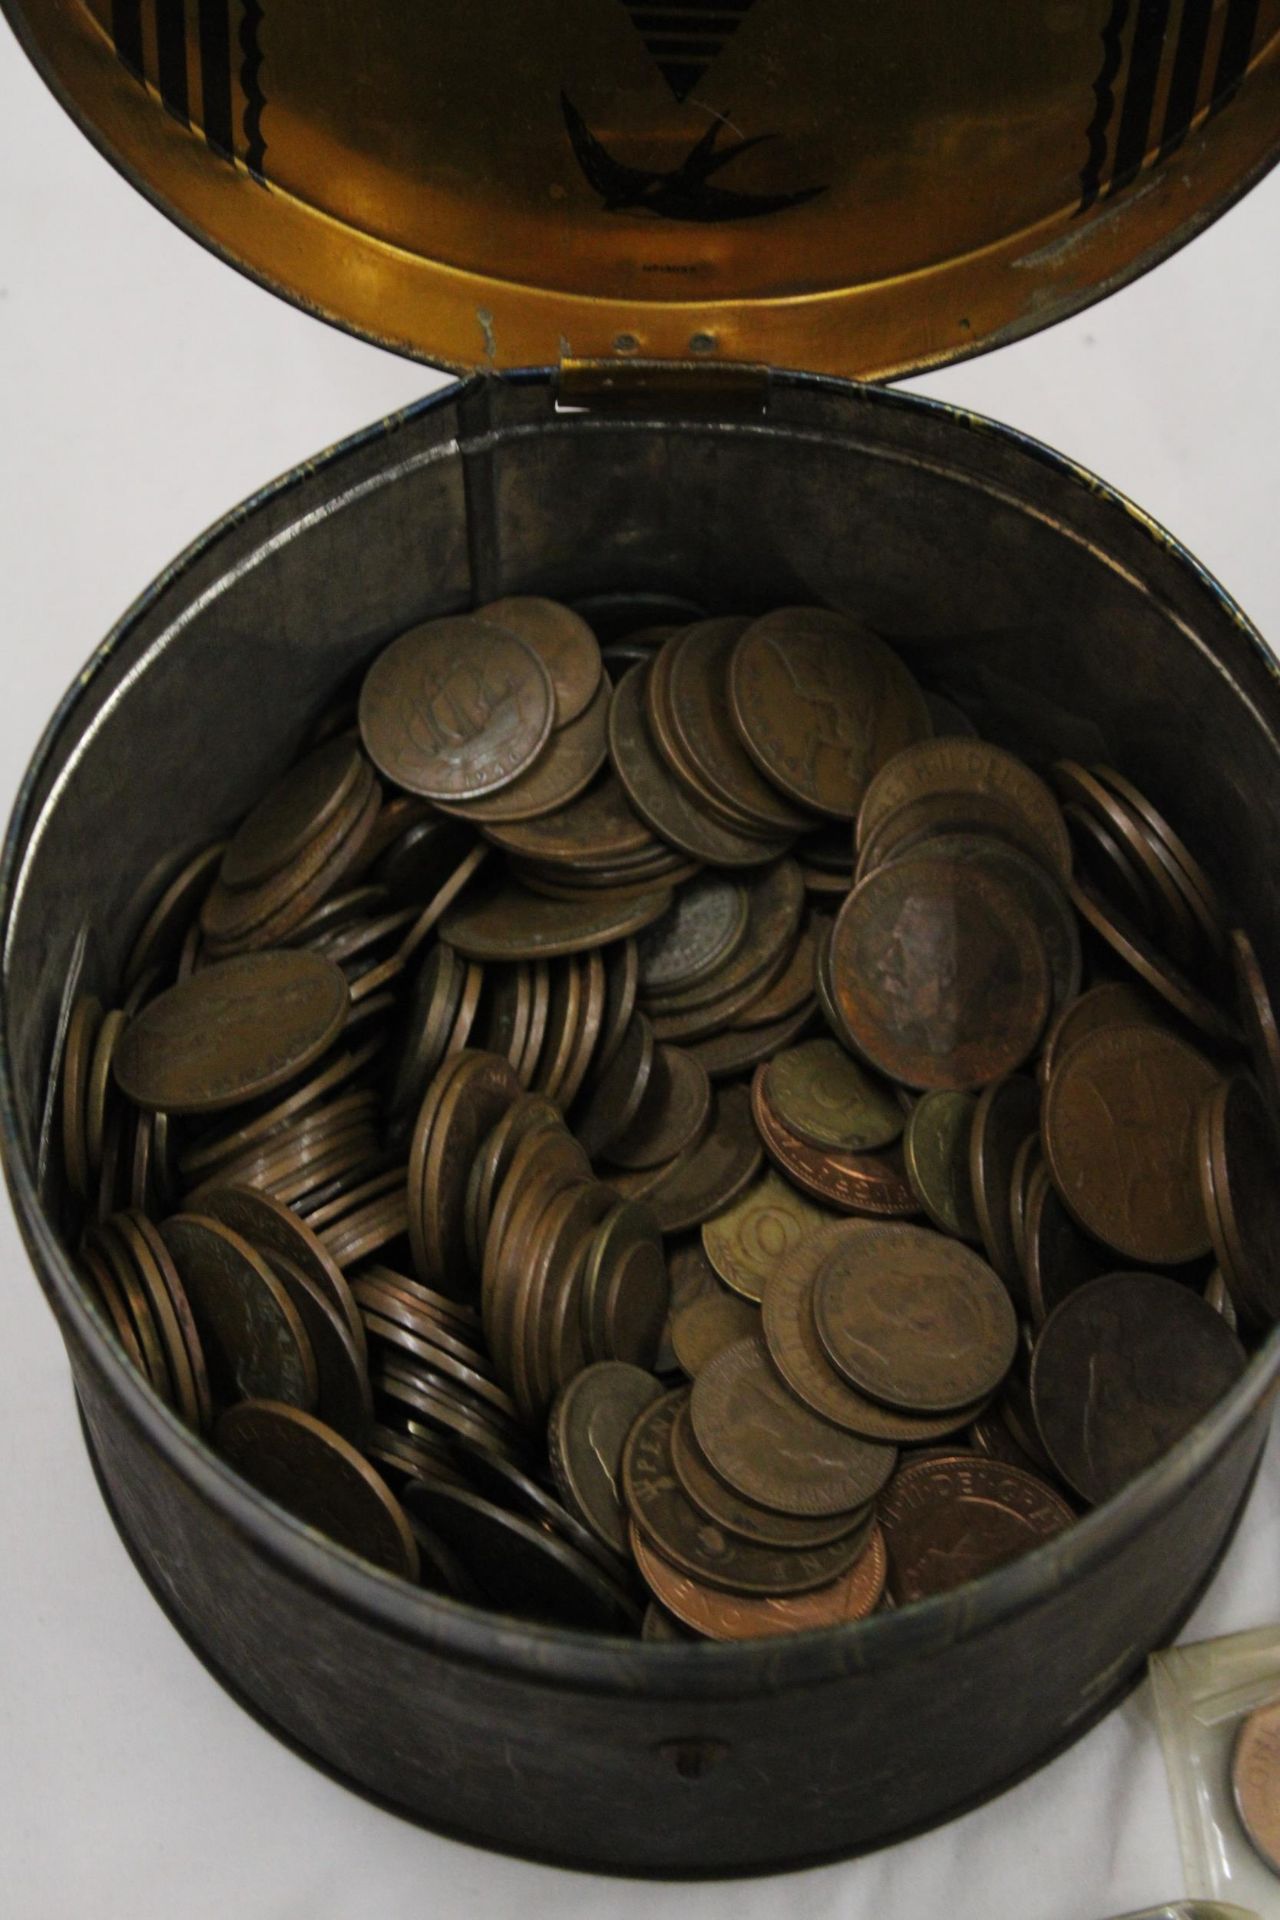 A LARGE TIN OF BRITISH COINS - Image 2 of 4